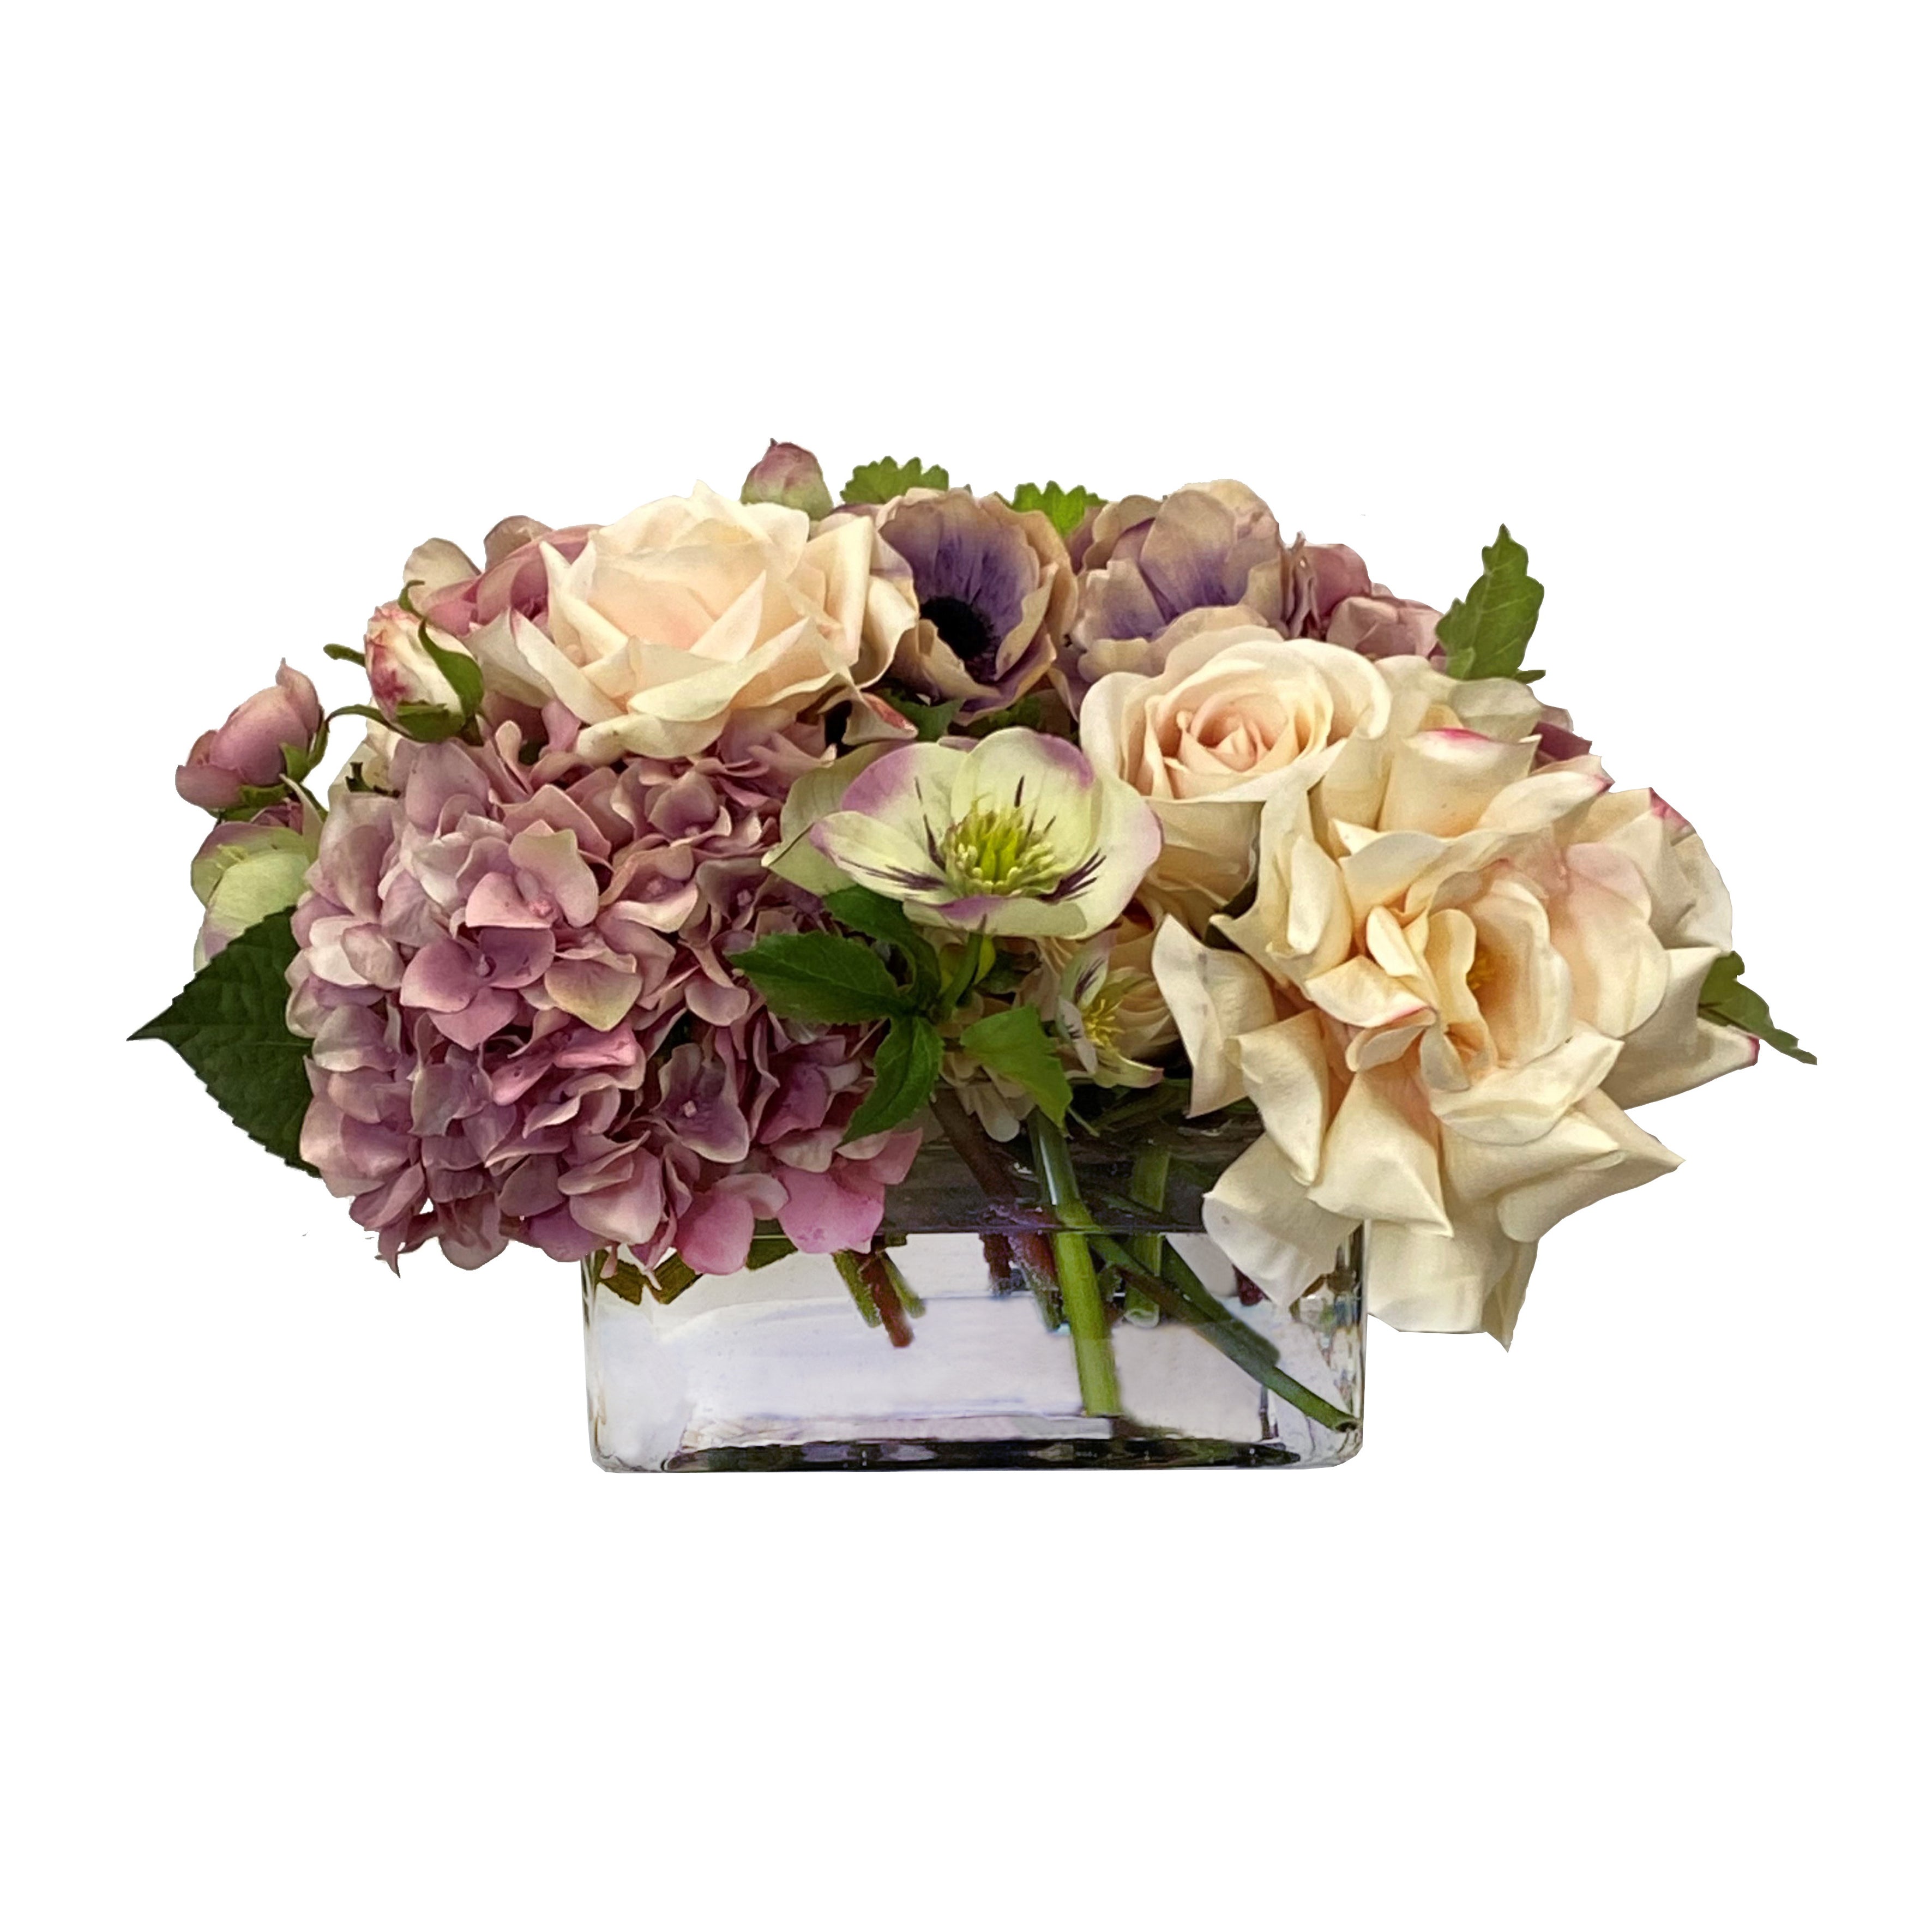 Luxury X-large Finest Real Touch Flower Arrangement in Box